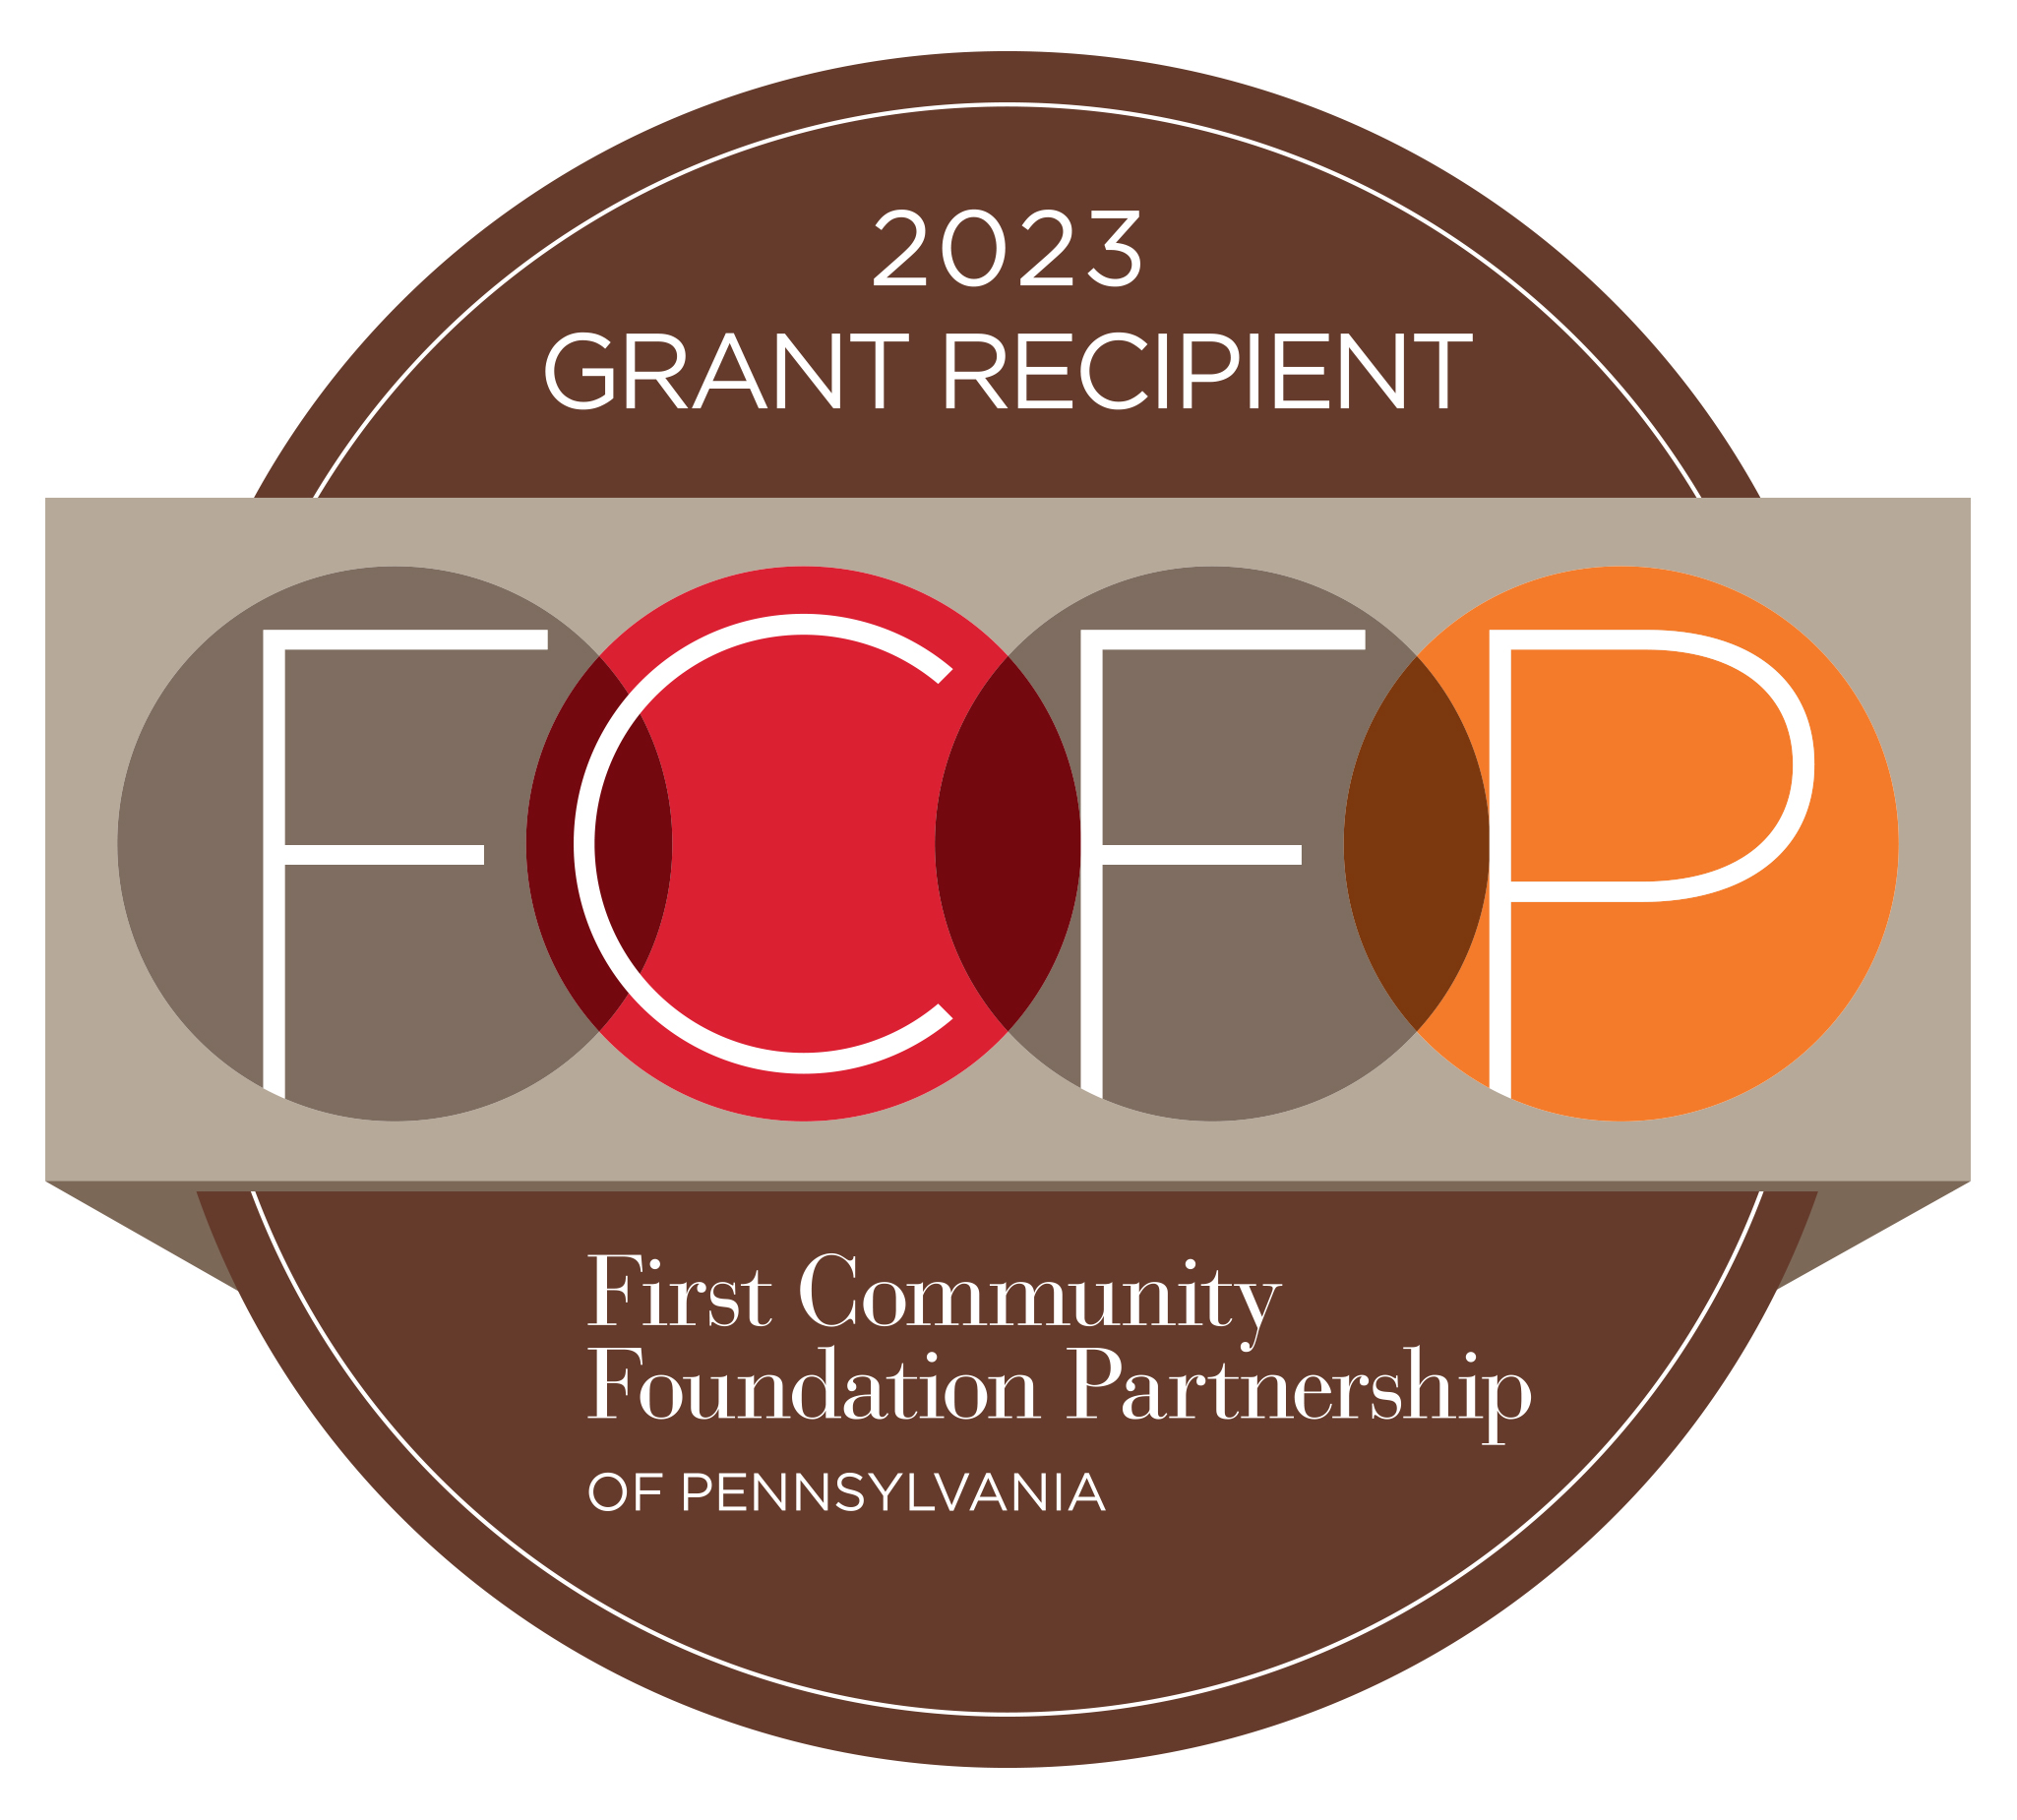 First Community Foundation Partnership of Pennsylvania awards NCSS a Grant to Help Fund Equipment Upgrades